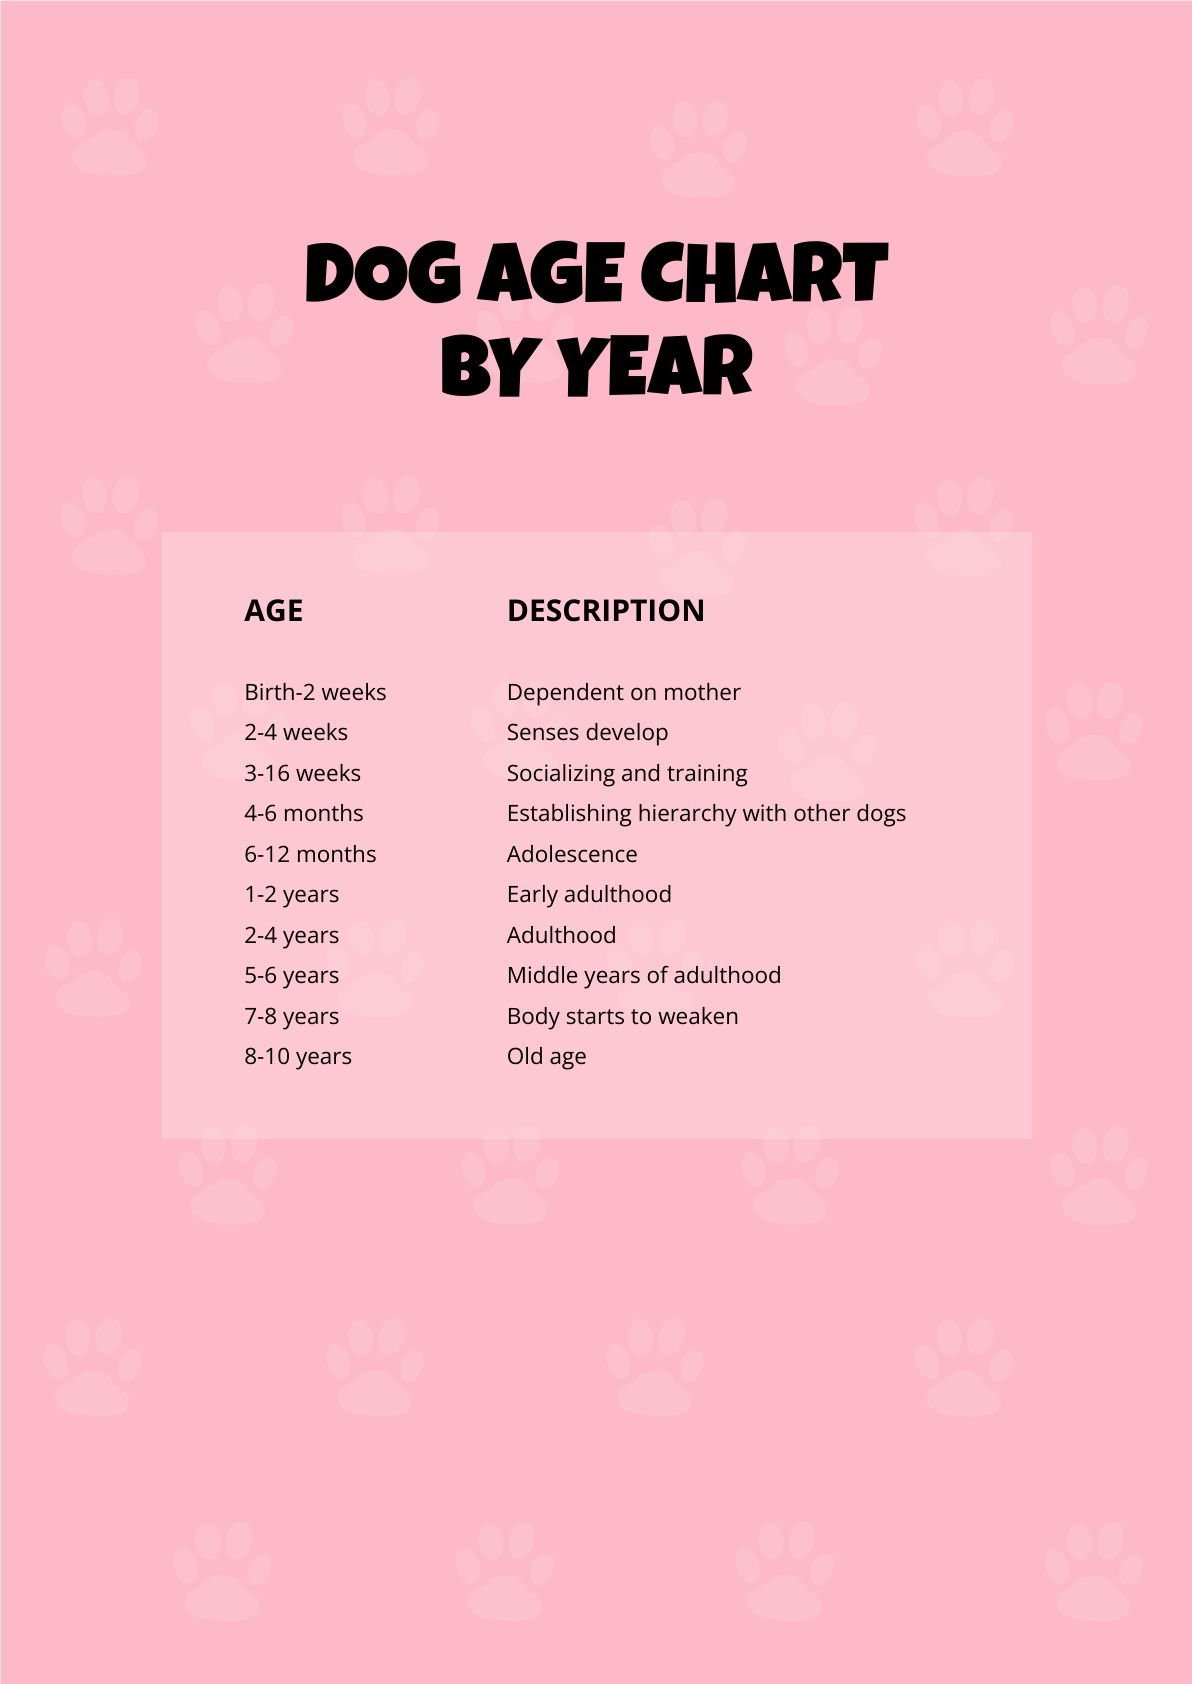 Dog Age Chart By Year in PDF